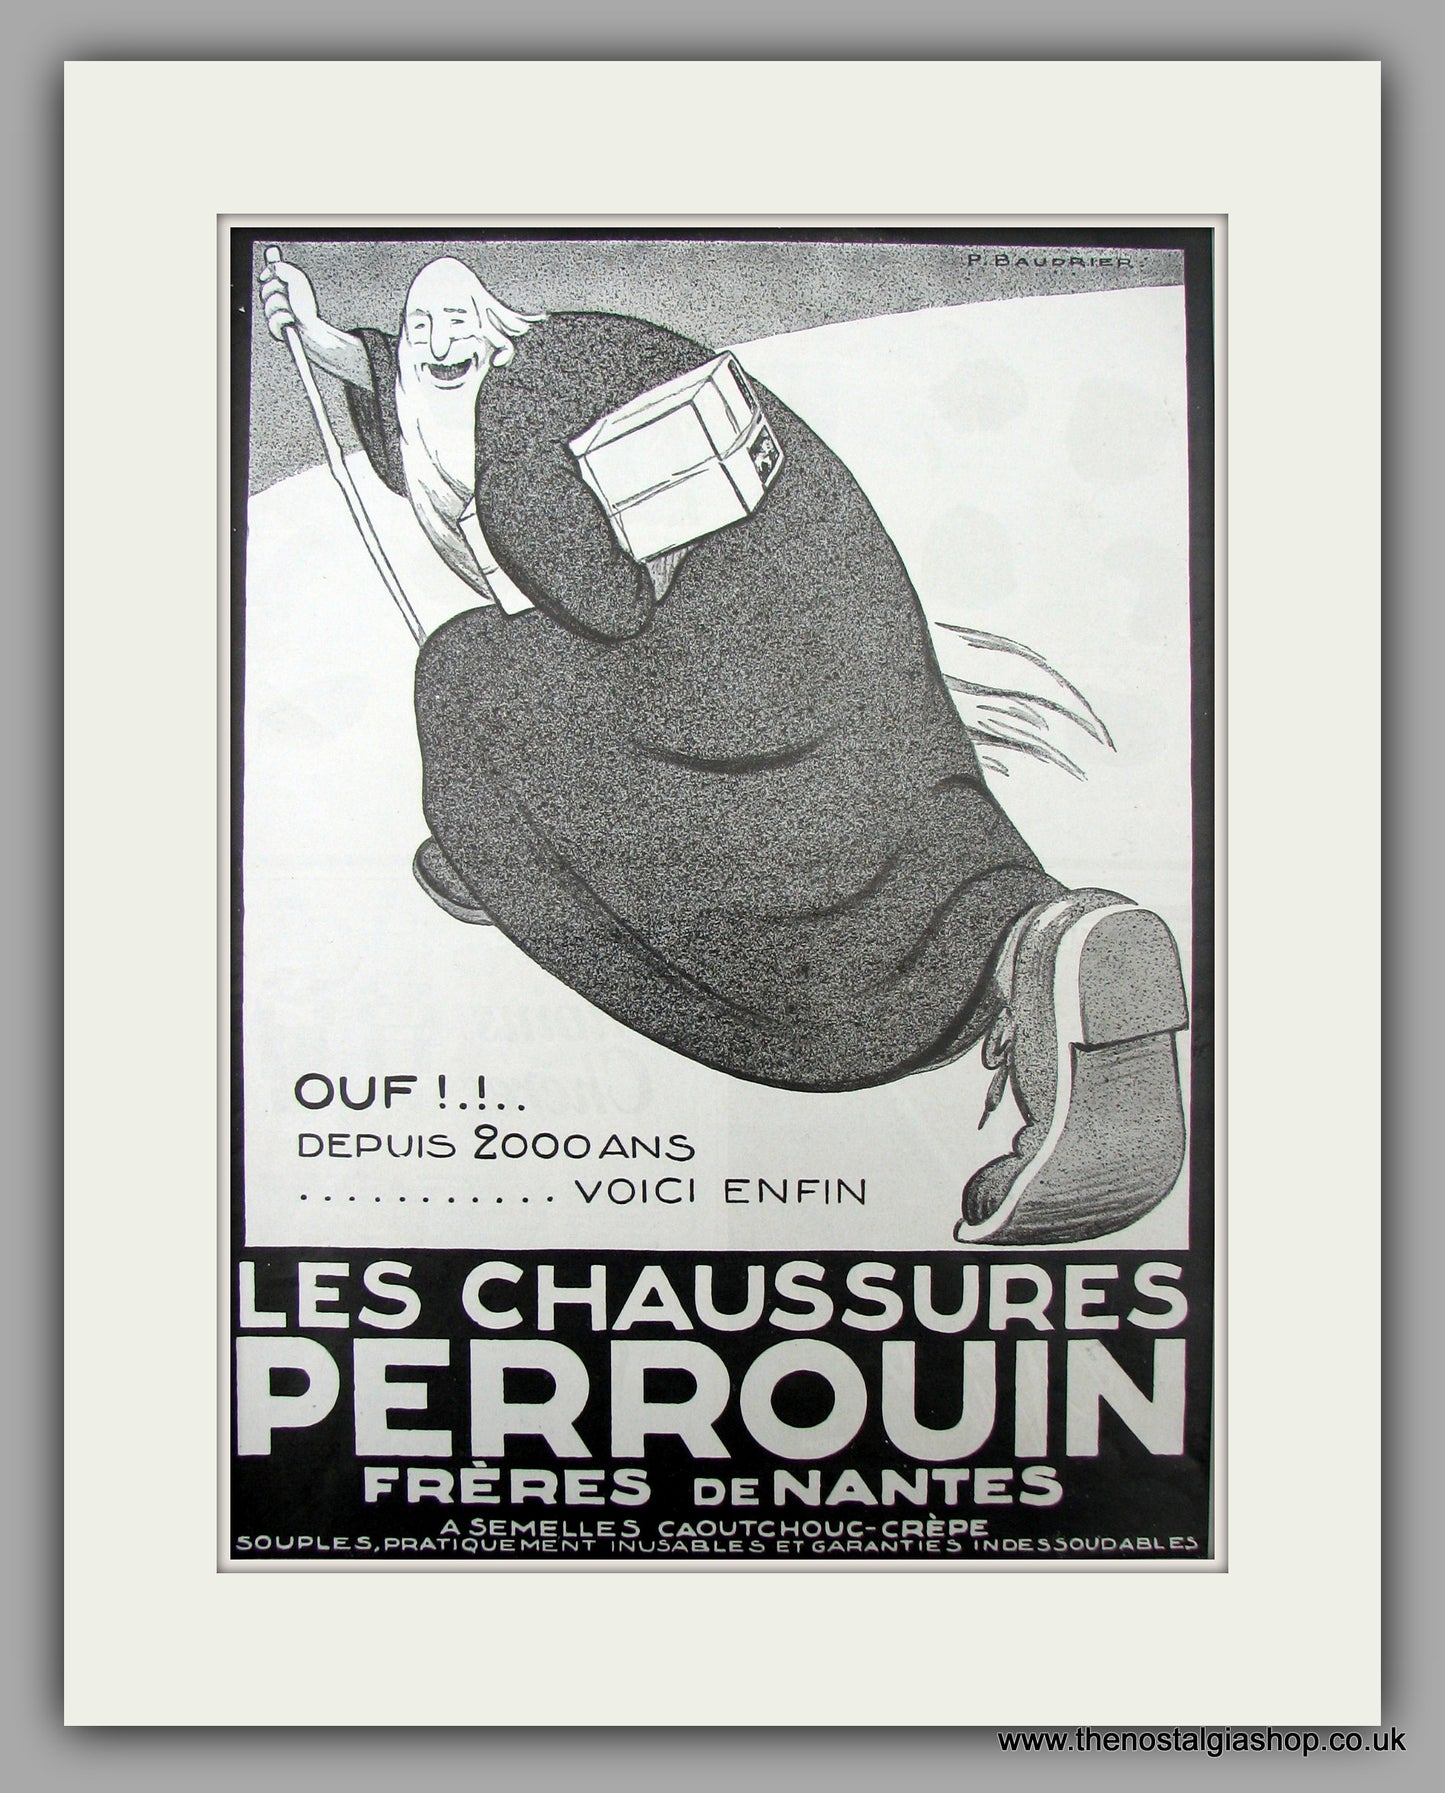 Les Chaussures Perrouin. French Footwear.  Original Vintage Advert 1924 (ref AD10111)